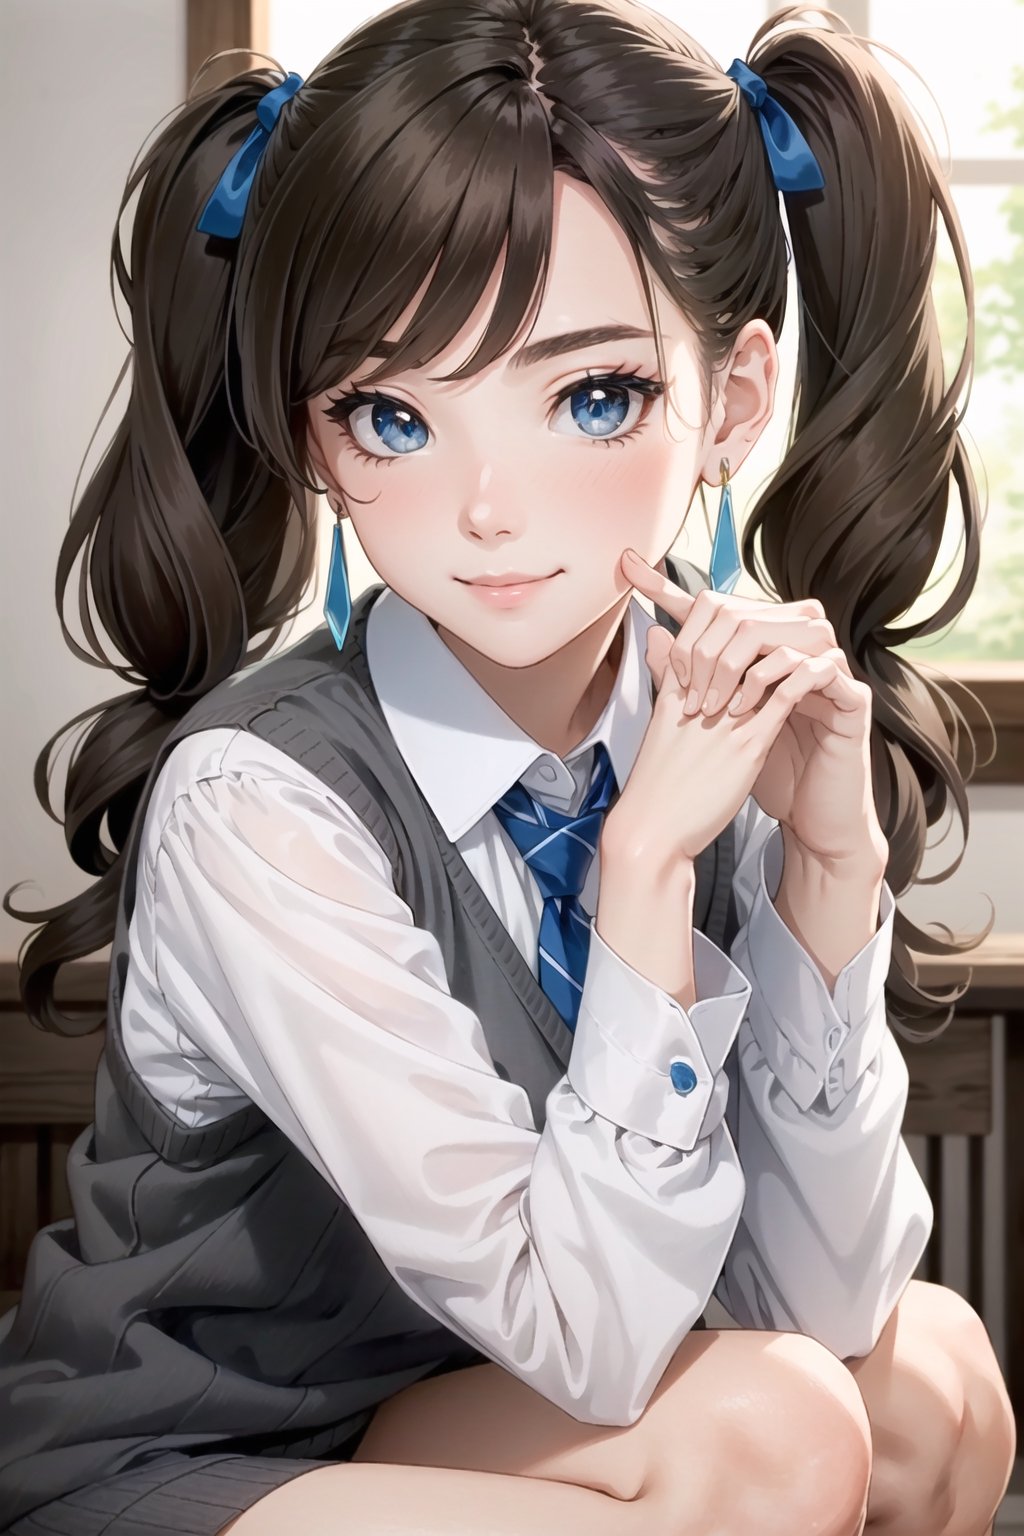 Extremely Realistic, Best quality, master piece, high resolution, high quality, high detail, perfect human anatomy, realistic , normal face and eyes and body and fingers and skin, perfect  face and eyes and body and fingers and skin, detailed face and eyes and body and fingers and skin, 16K,
1 girl, Japanese, light brown hair, long hair, wavy hair, pigtails, double hair, cute face, perfect female body, small breasts, skinny body, hairpin, inverted triangle earrings, checkered shirt, tie, sweater vest , missing bottoms fashion, knee socks, long-sleeved shirt, blush, forced smile, big eyes, park, cute pose,